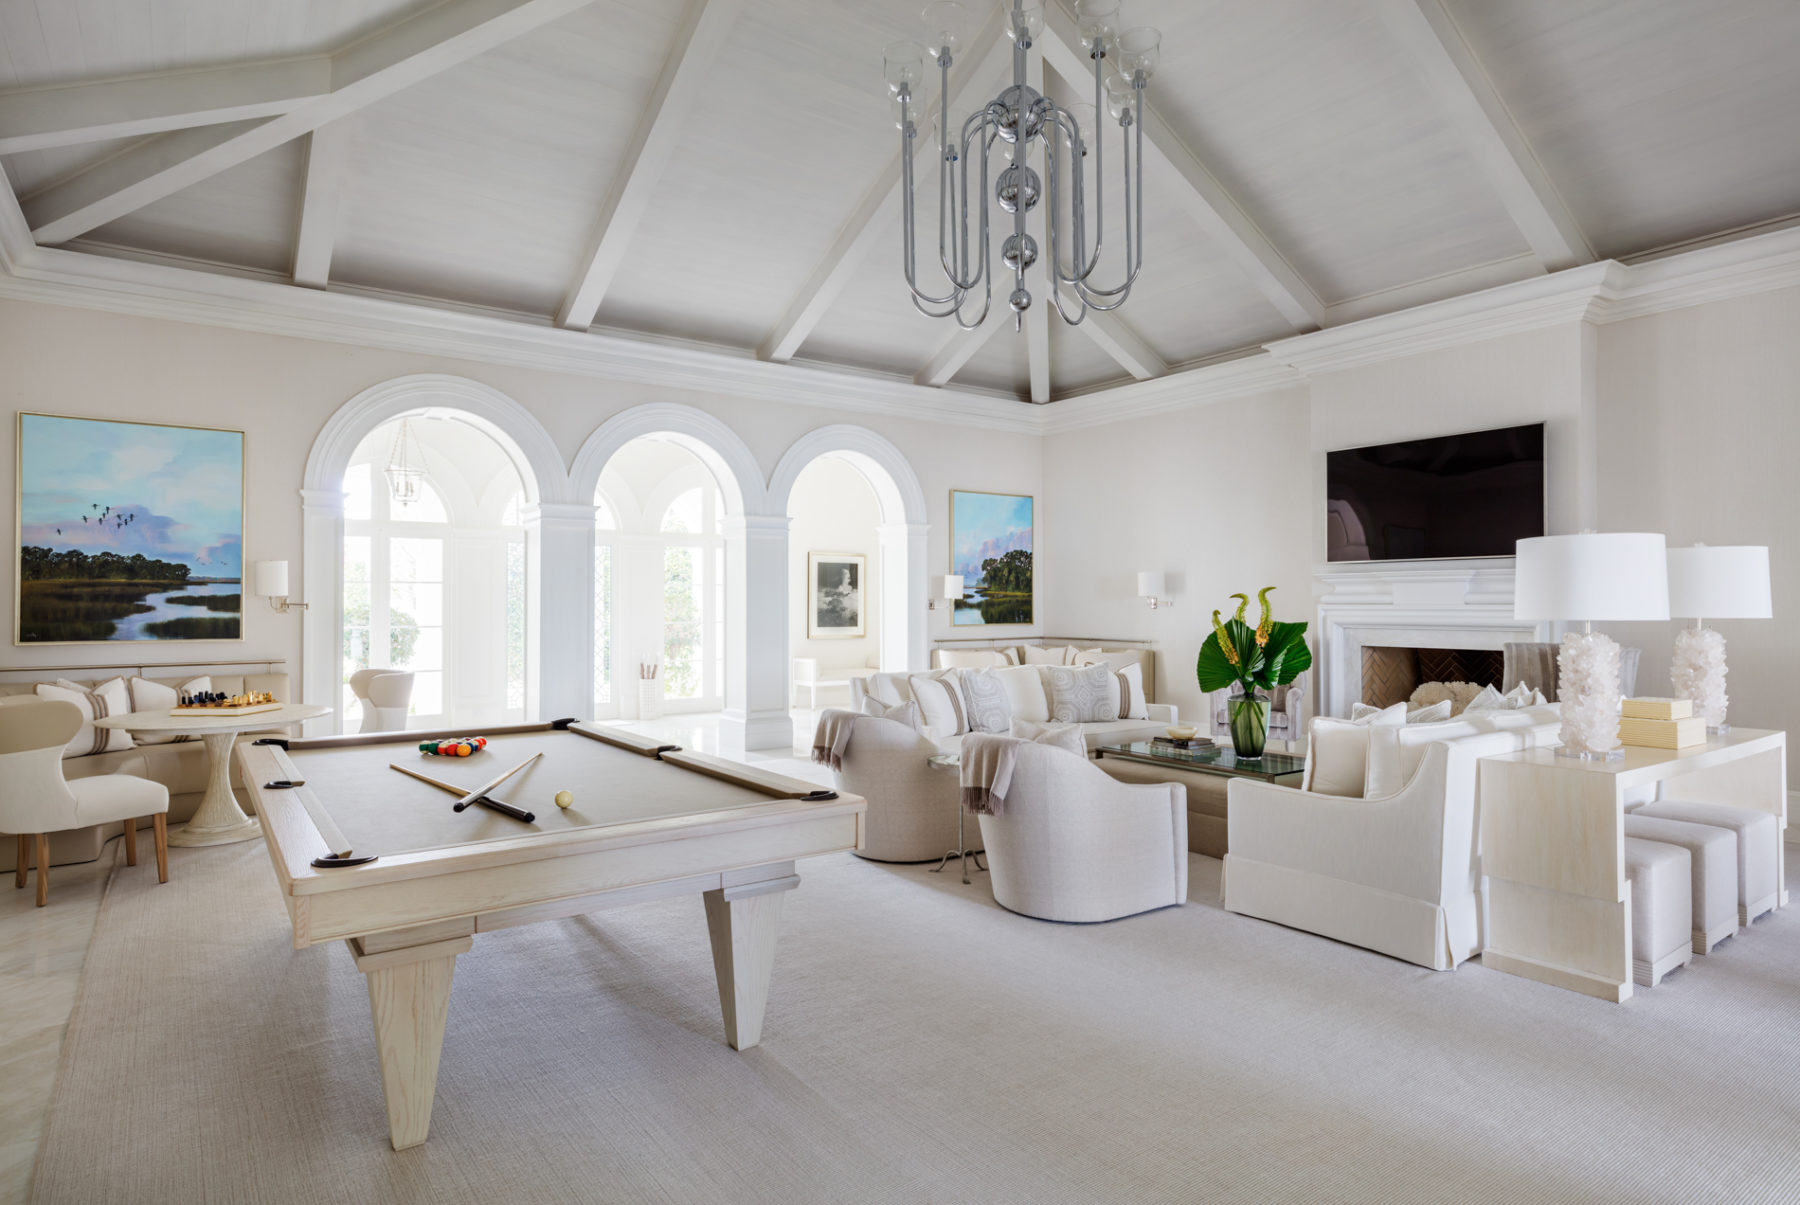 Image of Everglades Isle Waterfront living room with pool table and archways